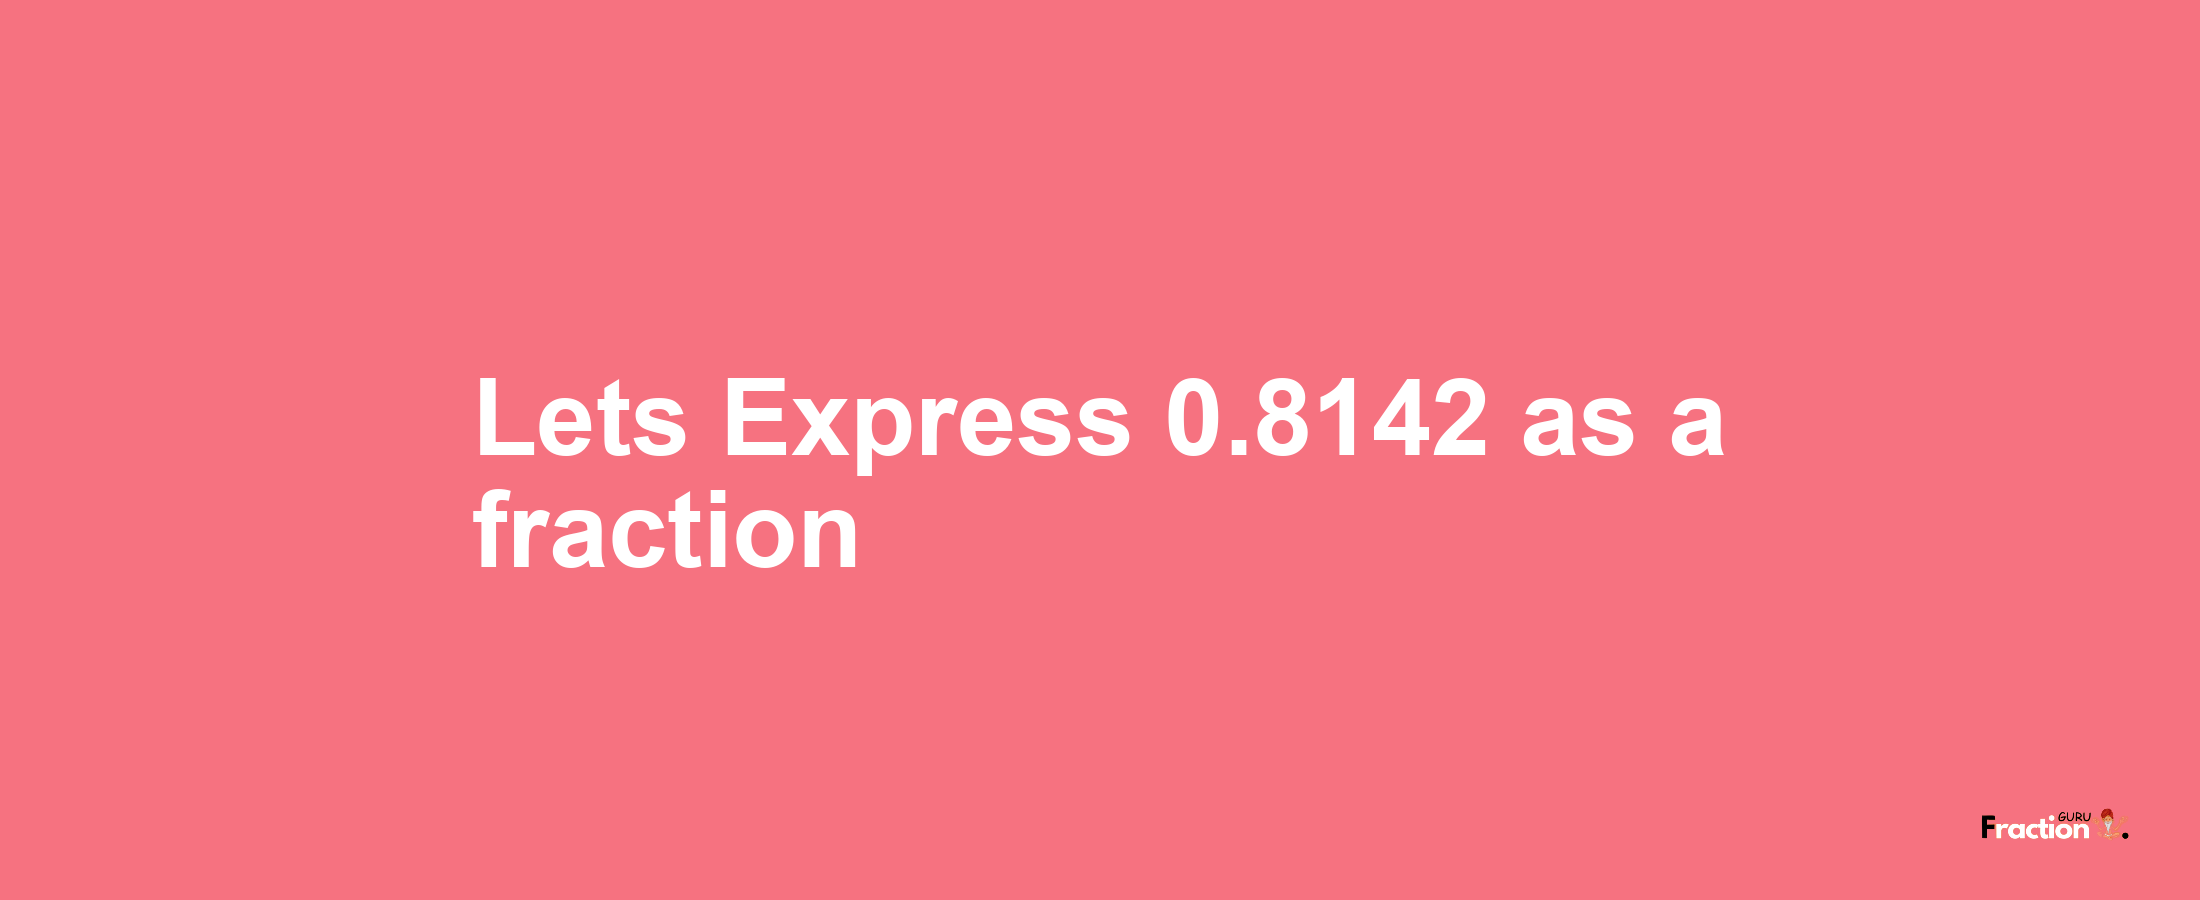 Lets Express 0.8142 as afraction